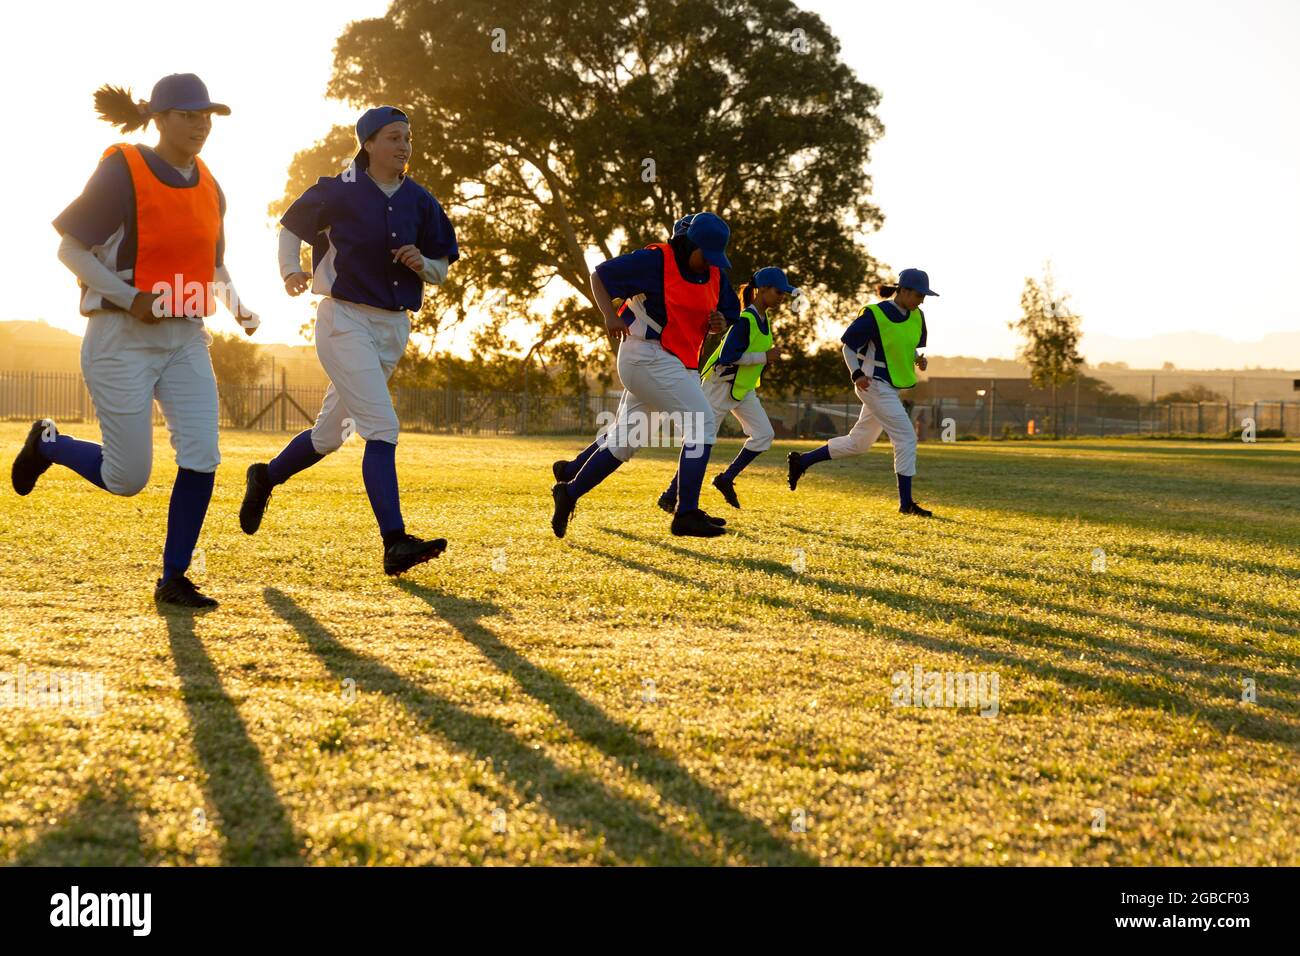 Diverse group of female baseball players warming up on field at sunrise, running Stock Photo